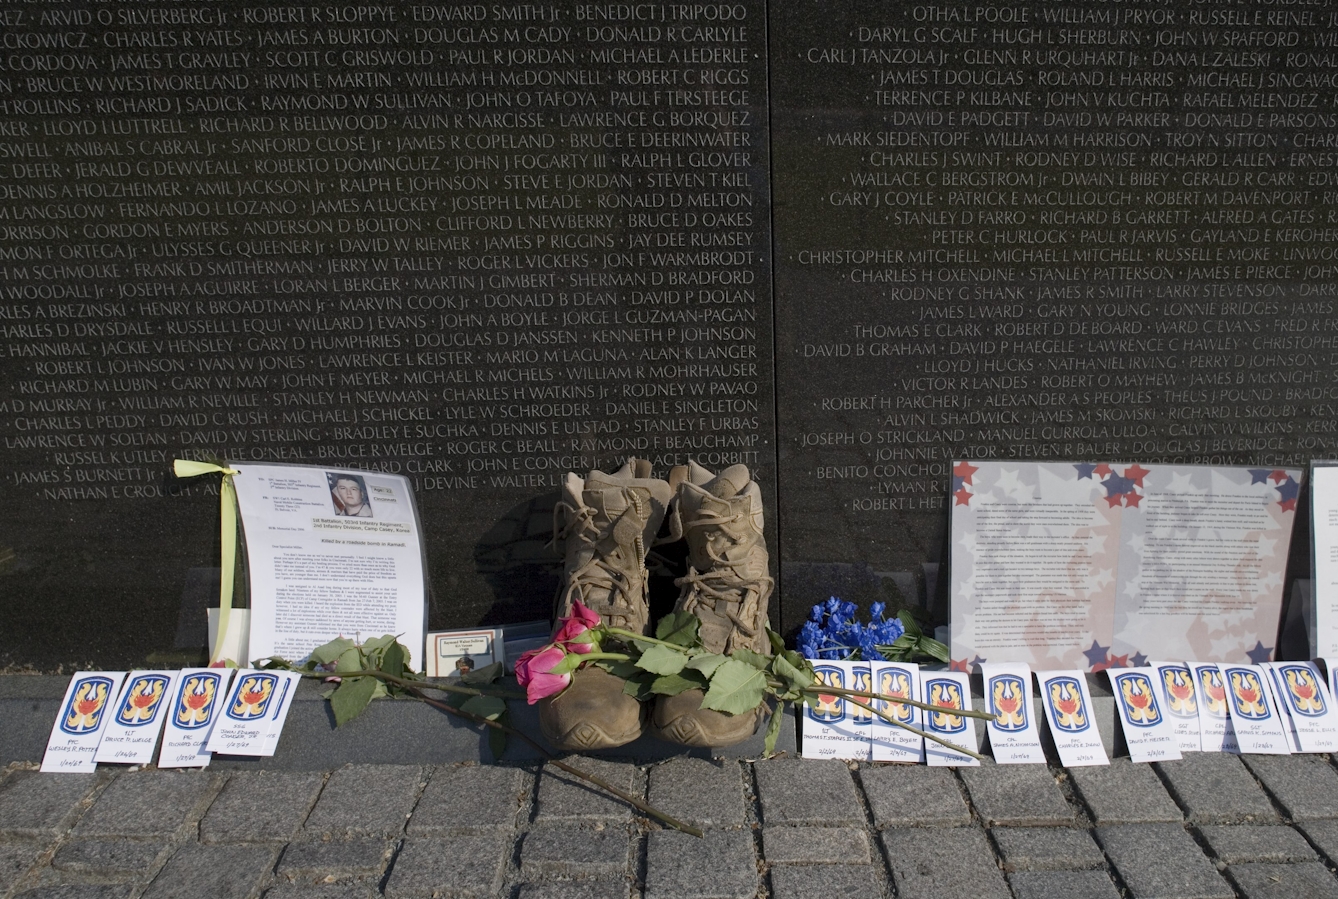 Photograph of objects left at the Vietnam War memorial in Washington. The image shows several obituaries, flowers, badges and a pair of boots which have been left against the memorial. On the marble memorial, engraved white text is visible showing a list of names. 